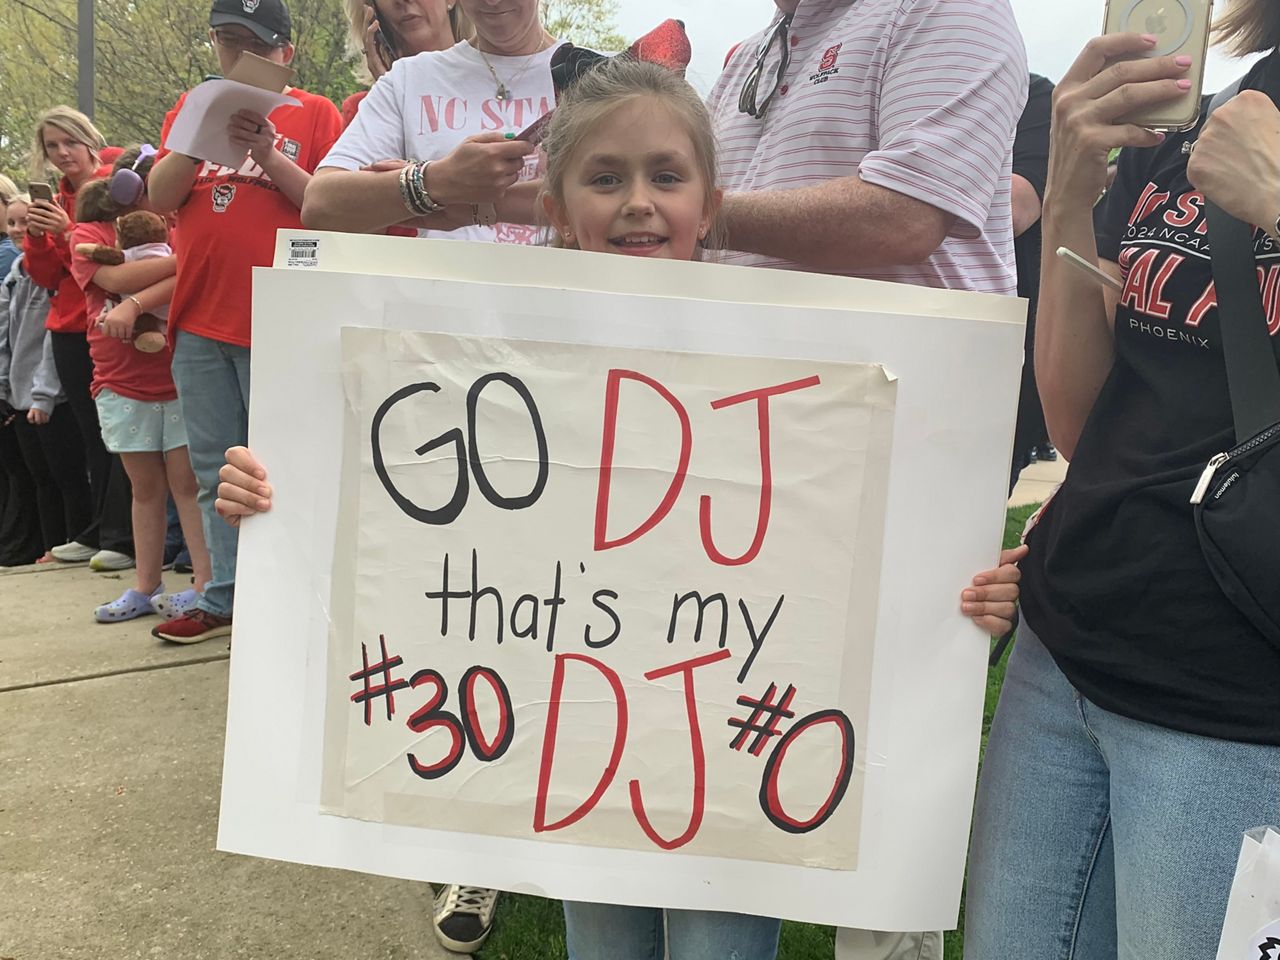 N.C. State fans wished the team well as the Wolfpack left for Arizona. (Spectrum News 1/Patrick Thomas)